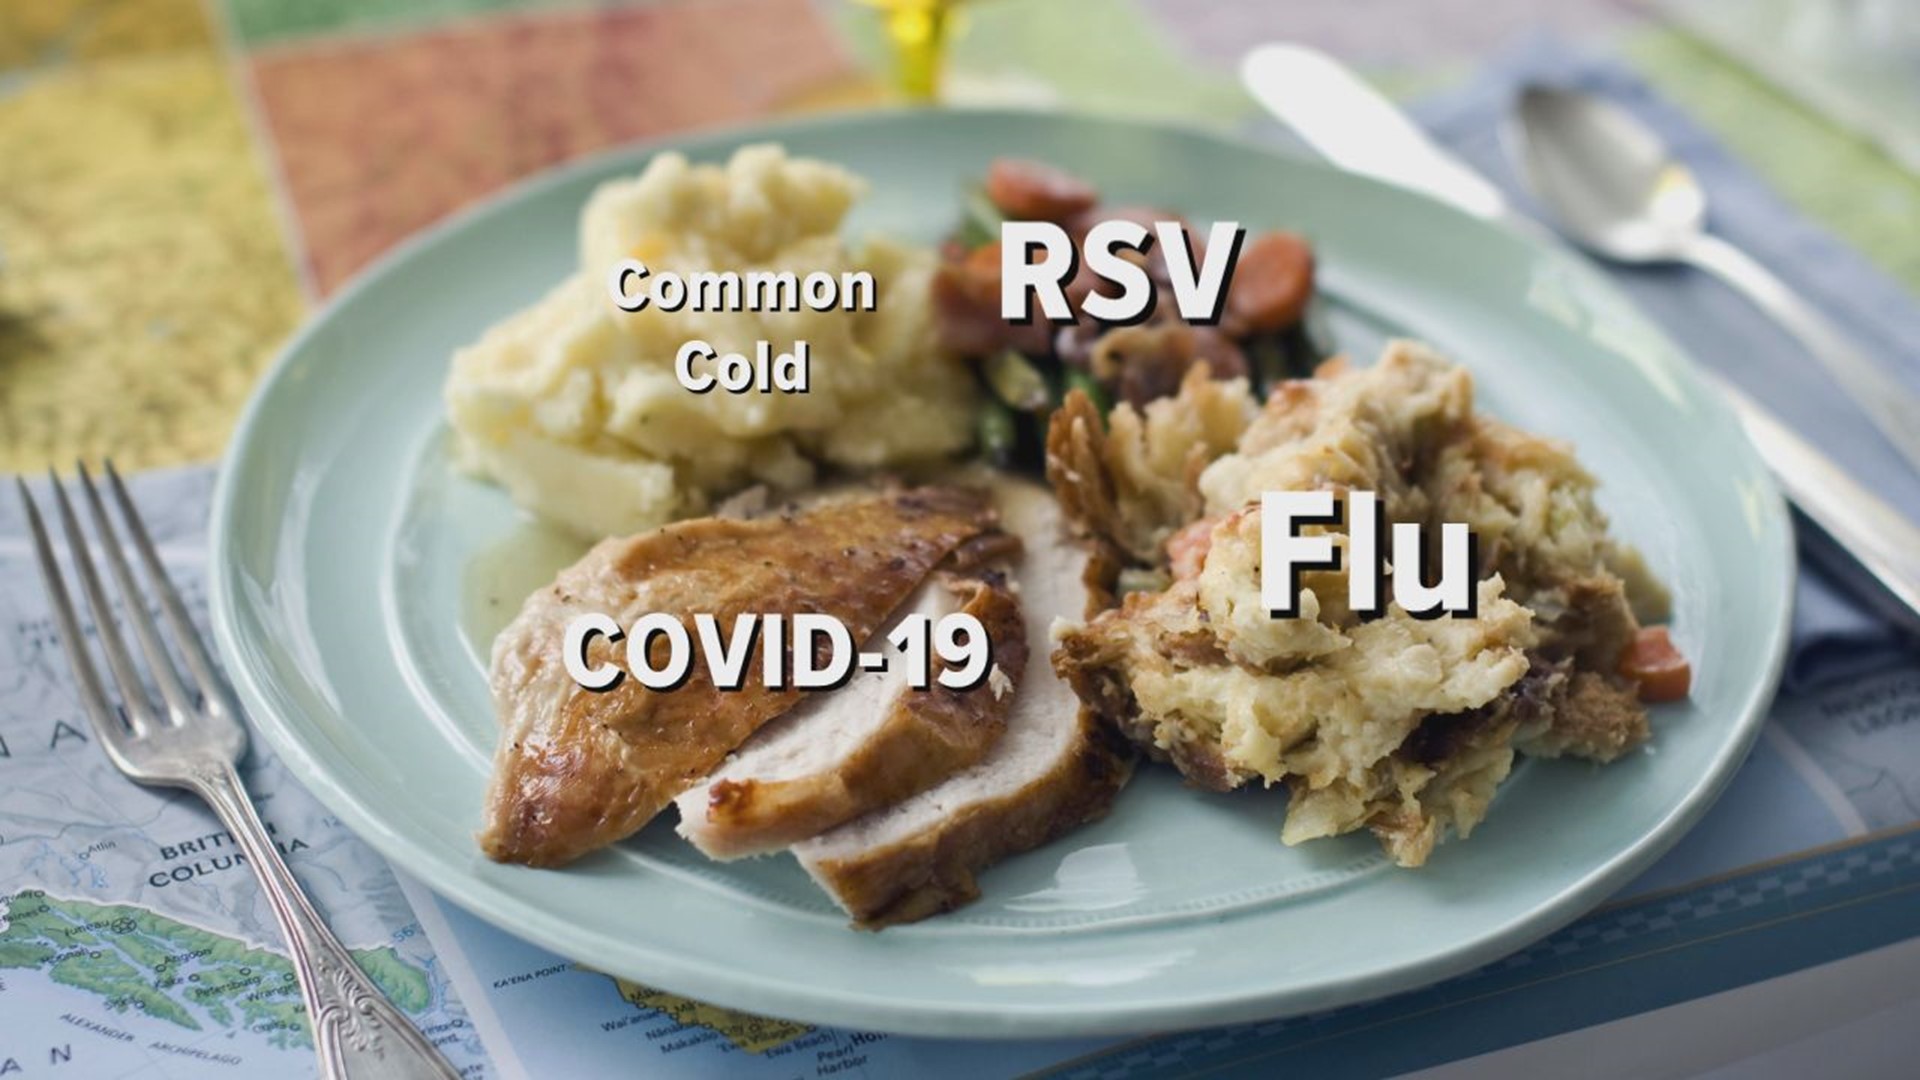 Flu, COVID-19, RSV and the common cold are all on the rise as the busiest time to travel in the U.S. hits.